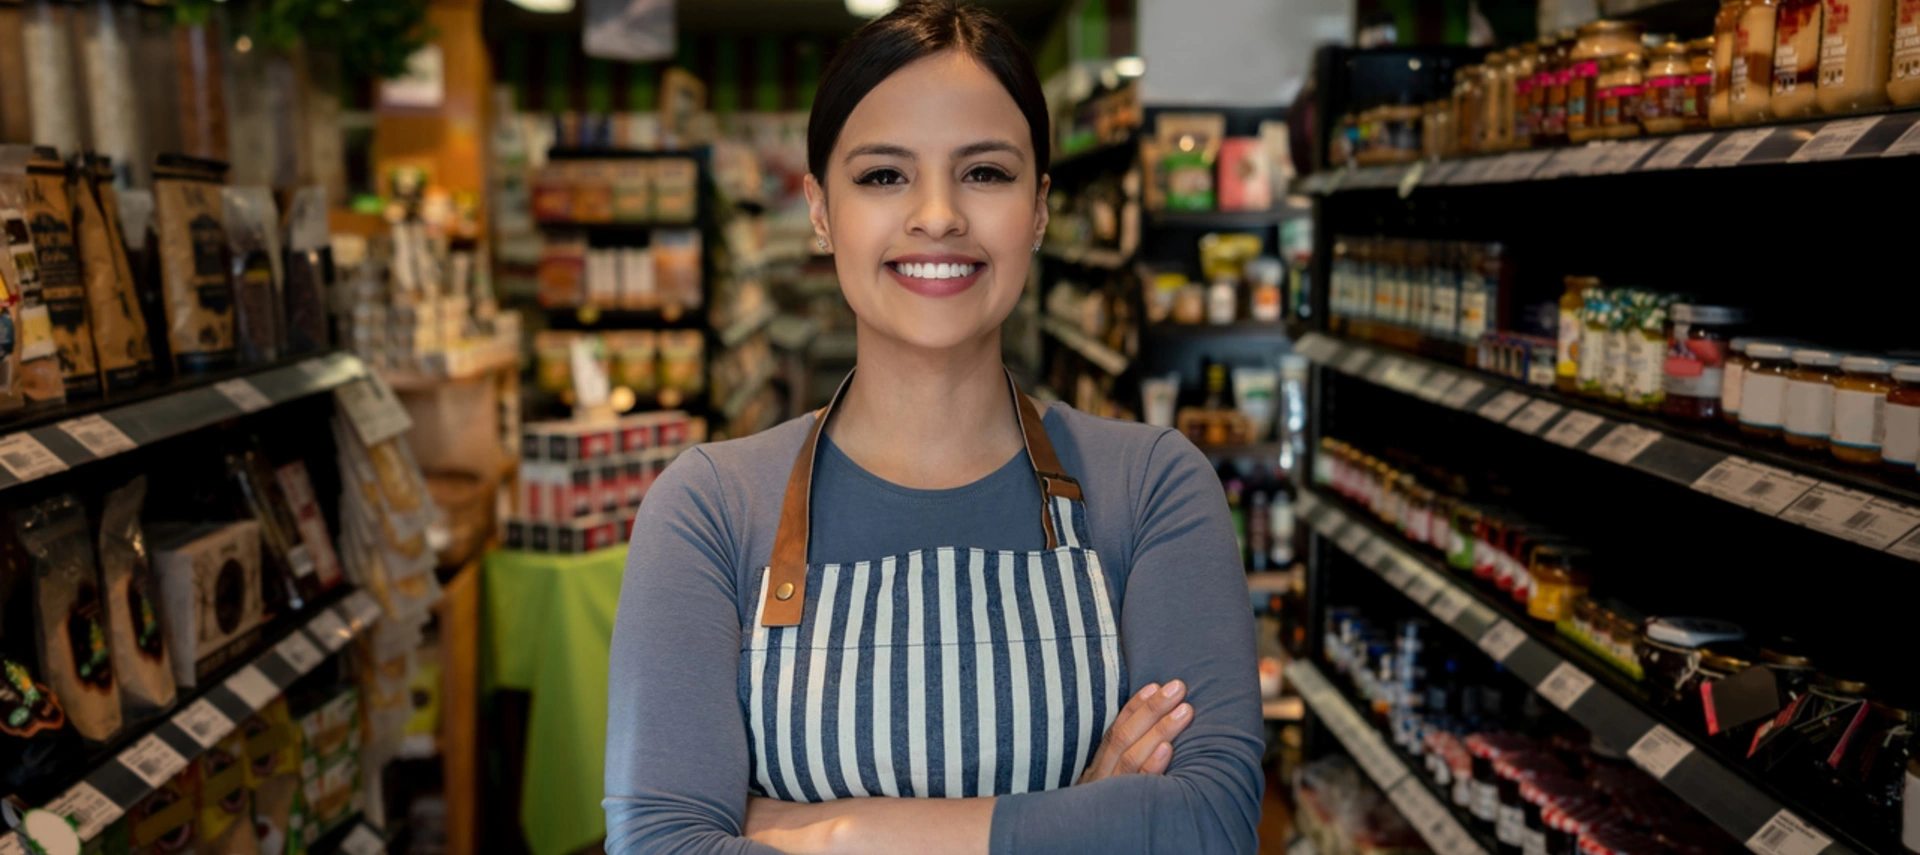 Image of a woman who works at a supermarket smiling